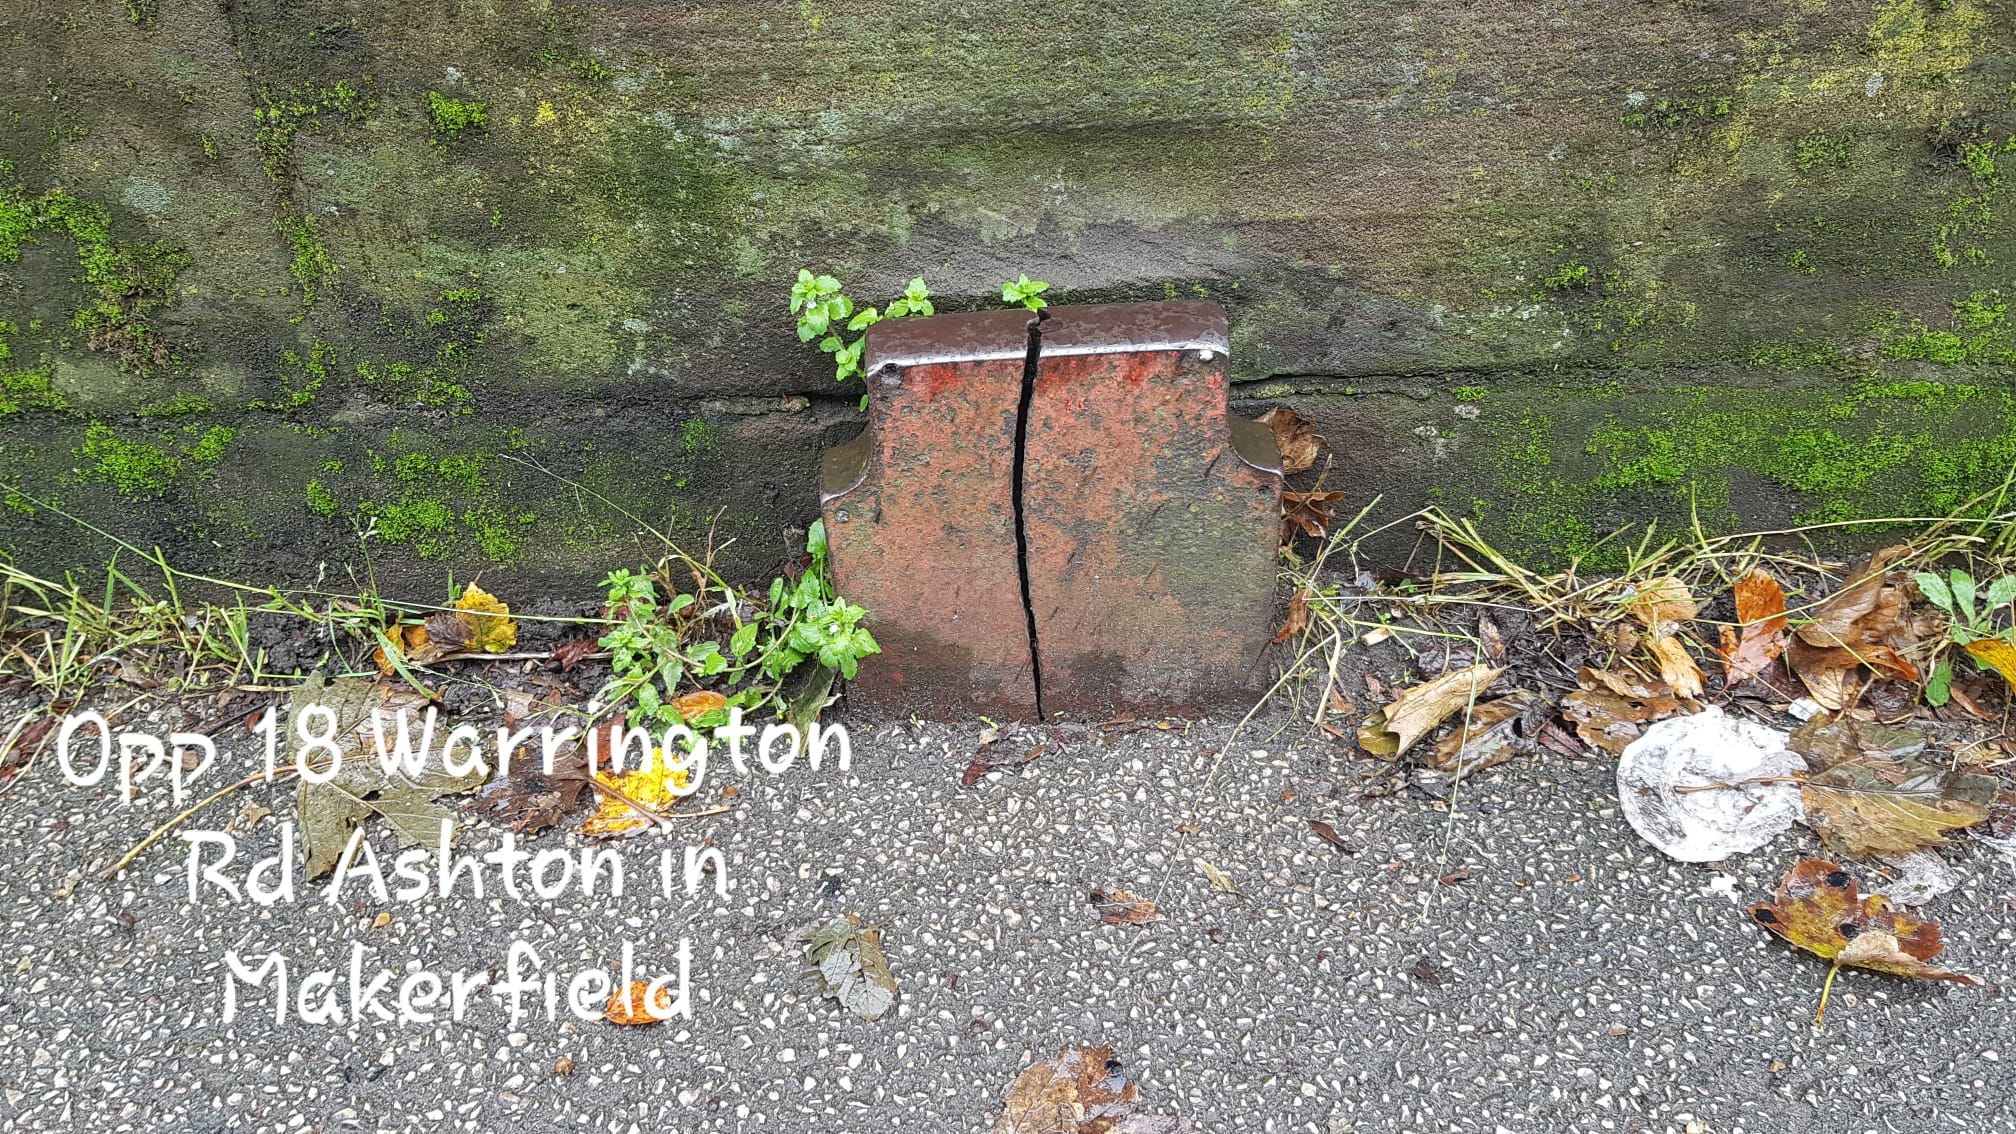 Telegraph cable marker post at opp. 18 Warrington Road, Ashton-in-Makerfield, Wigan by Jan Gibbons 